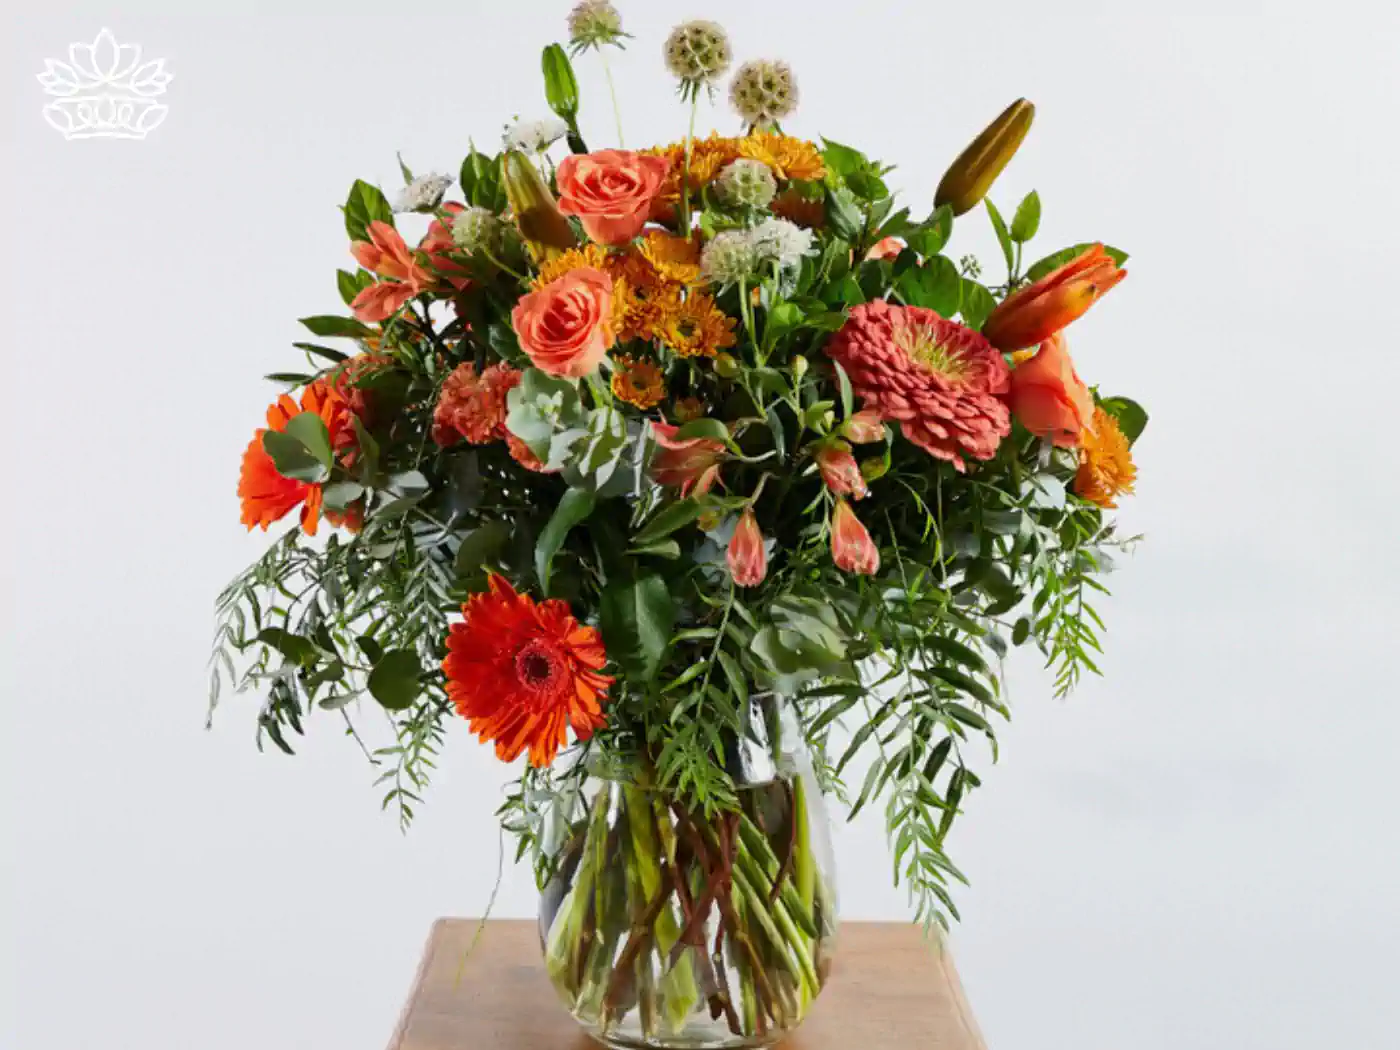 Elegant and beautiful front desk floral display in a glass vase, featuring an assortment of orange blooms, lush greens, and exotic flowers, perfectly arranged to welcome guests.